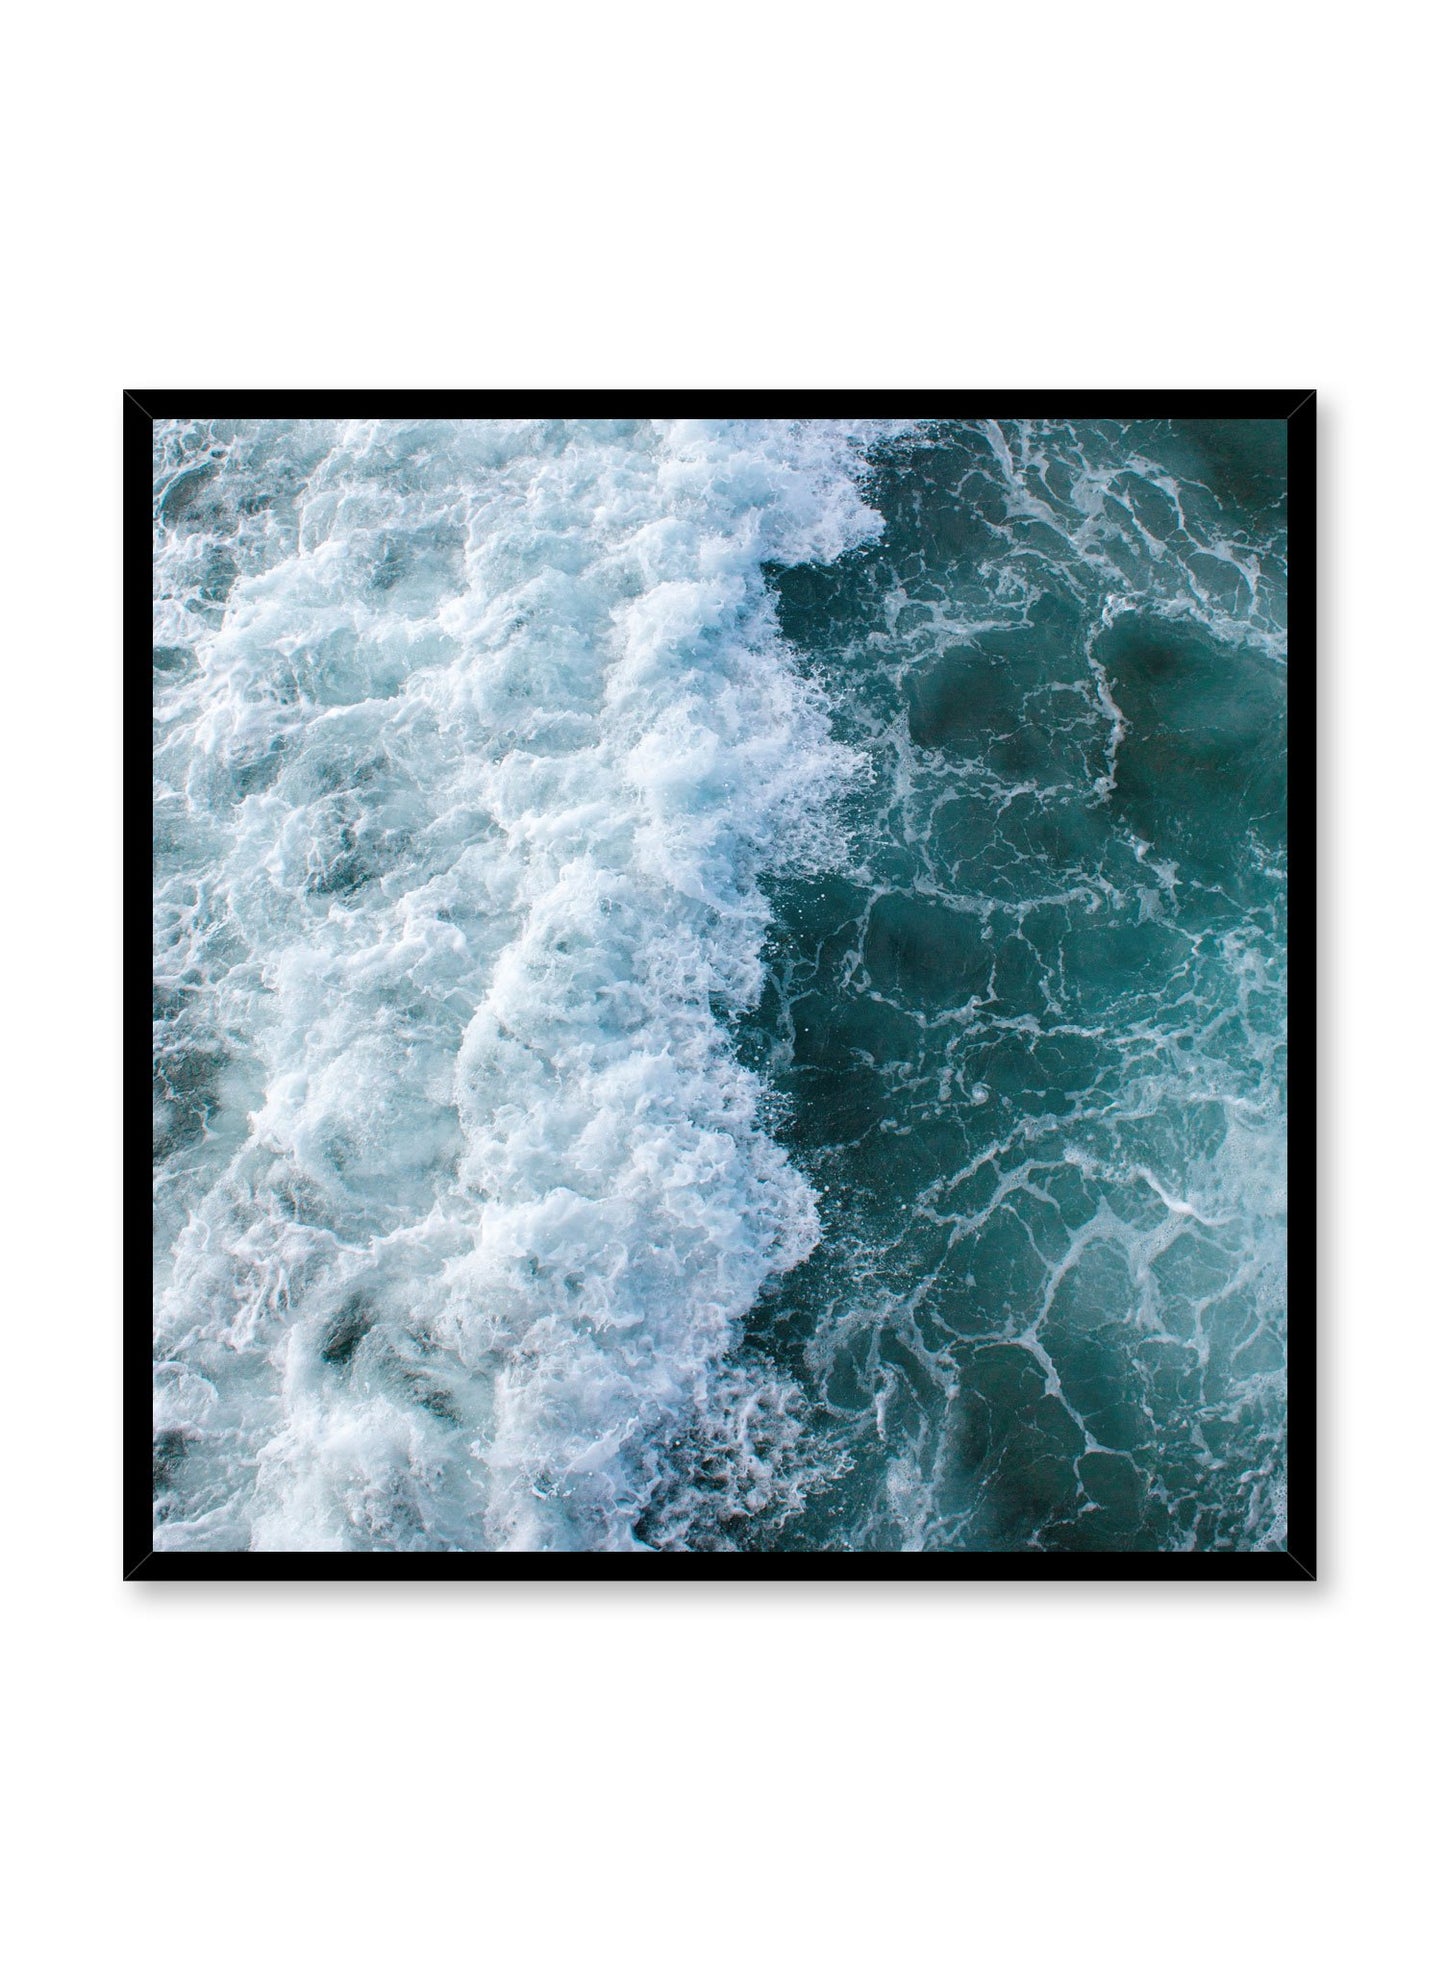 Modern minimalist poster by Opposite Wall with Emerald waters photography in square format